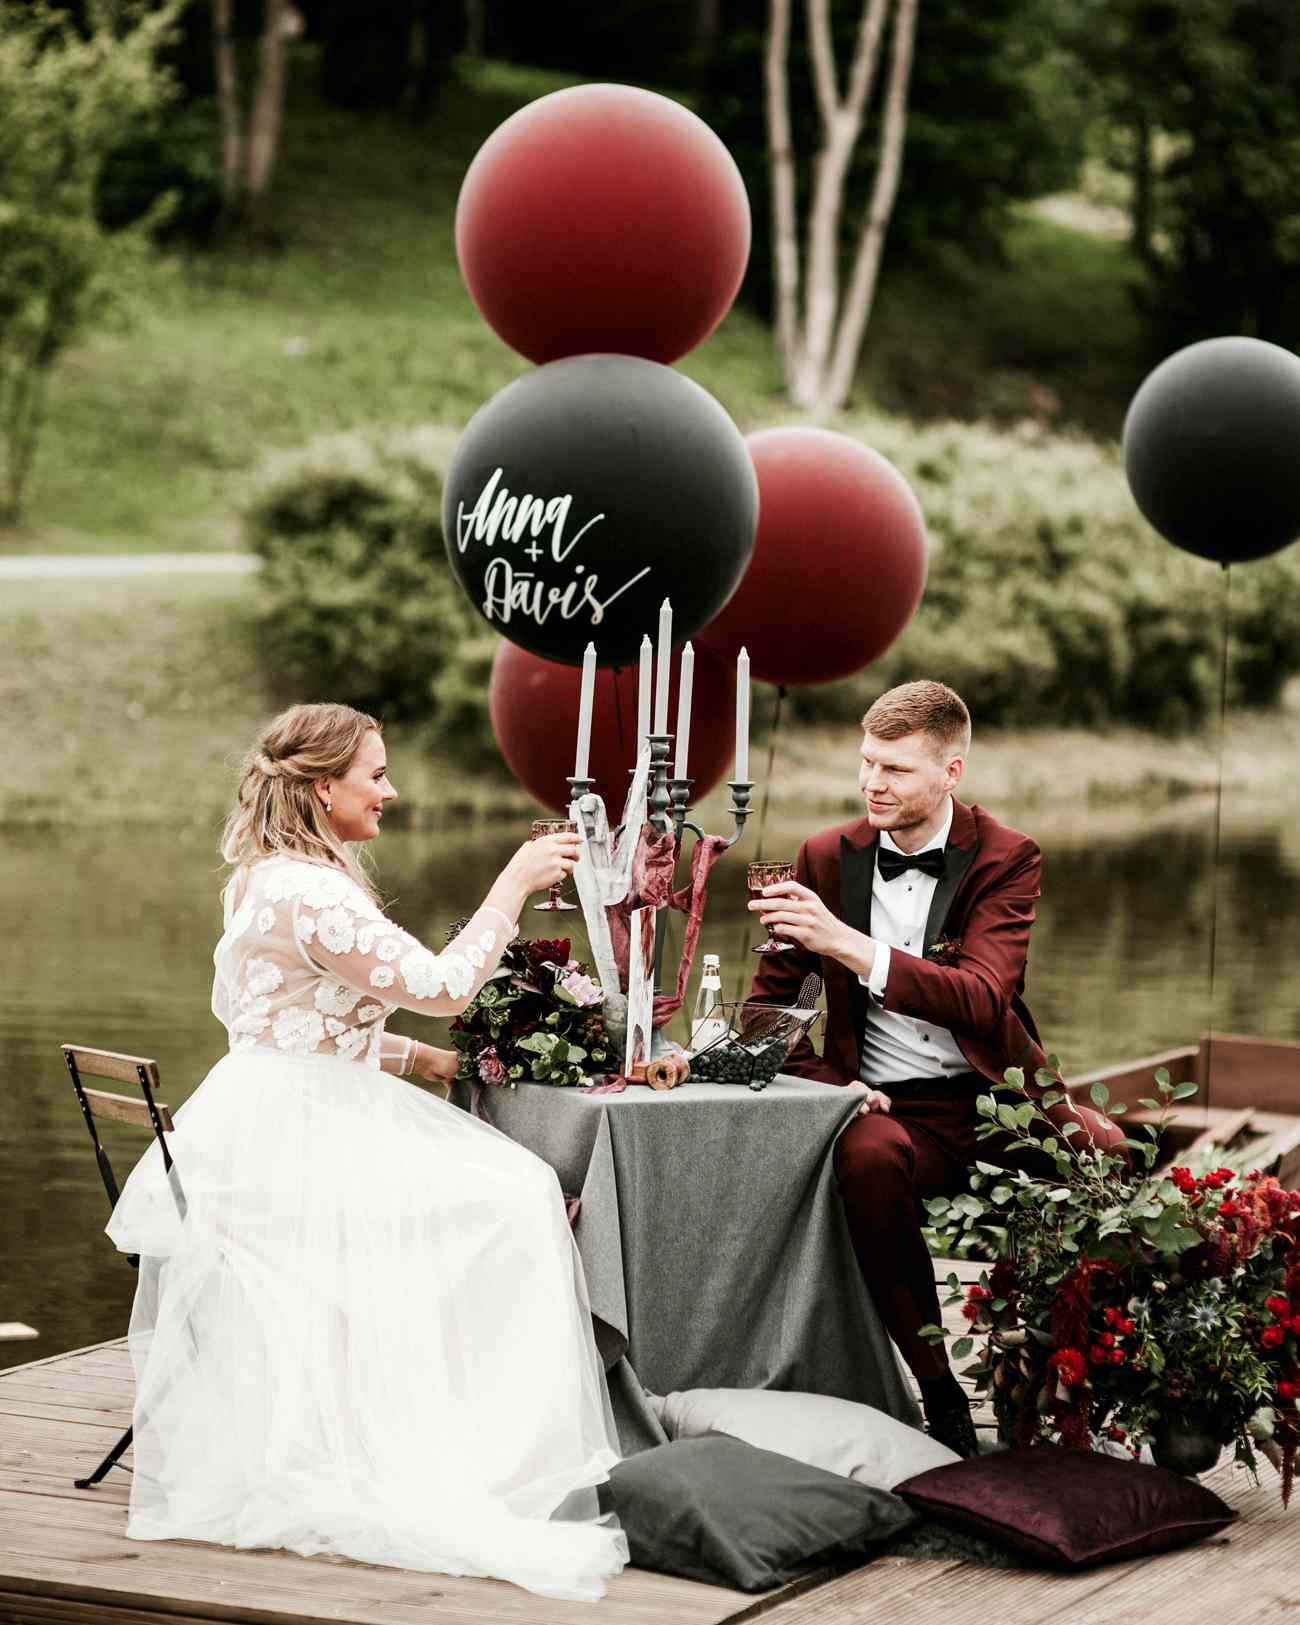 Hosaire 1 Pair Romantic Wedding Balloon Groom Bride Dress Foil Balloon Decoration for Marriage Anniversary Party 